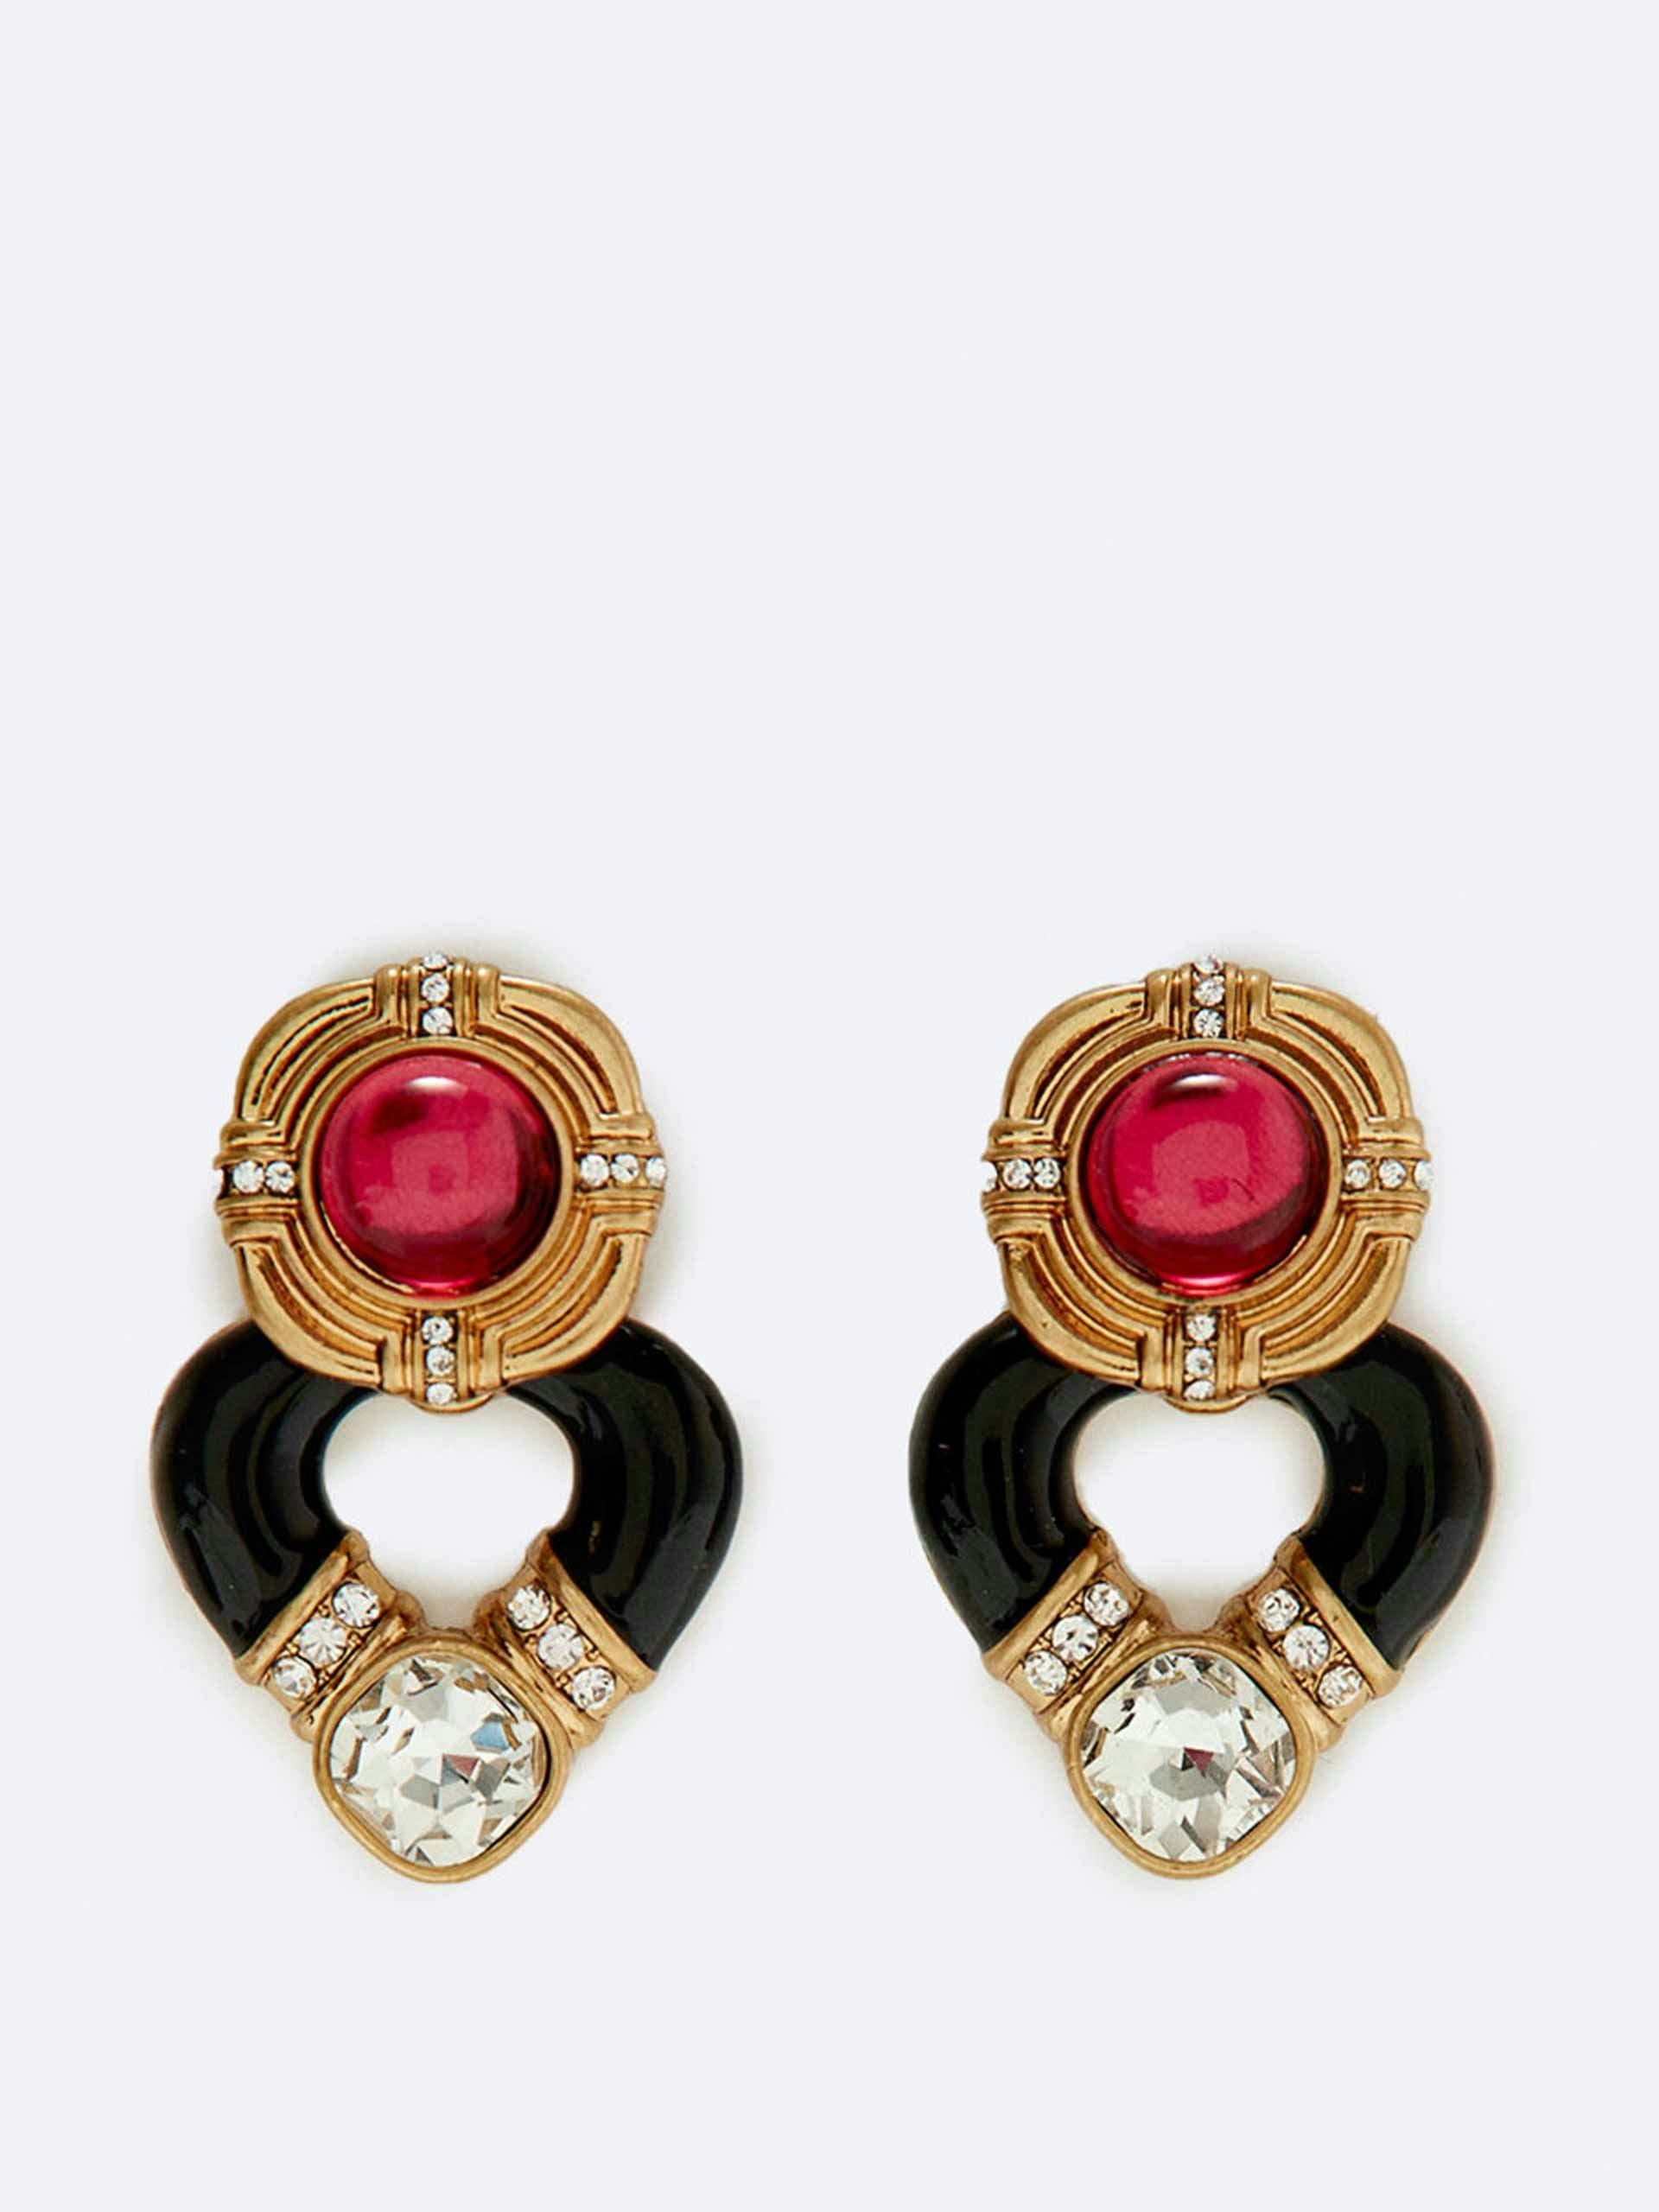 Bejewelled gold-plated earrings